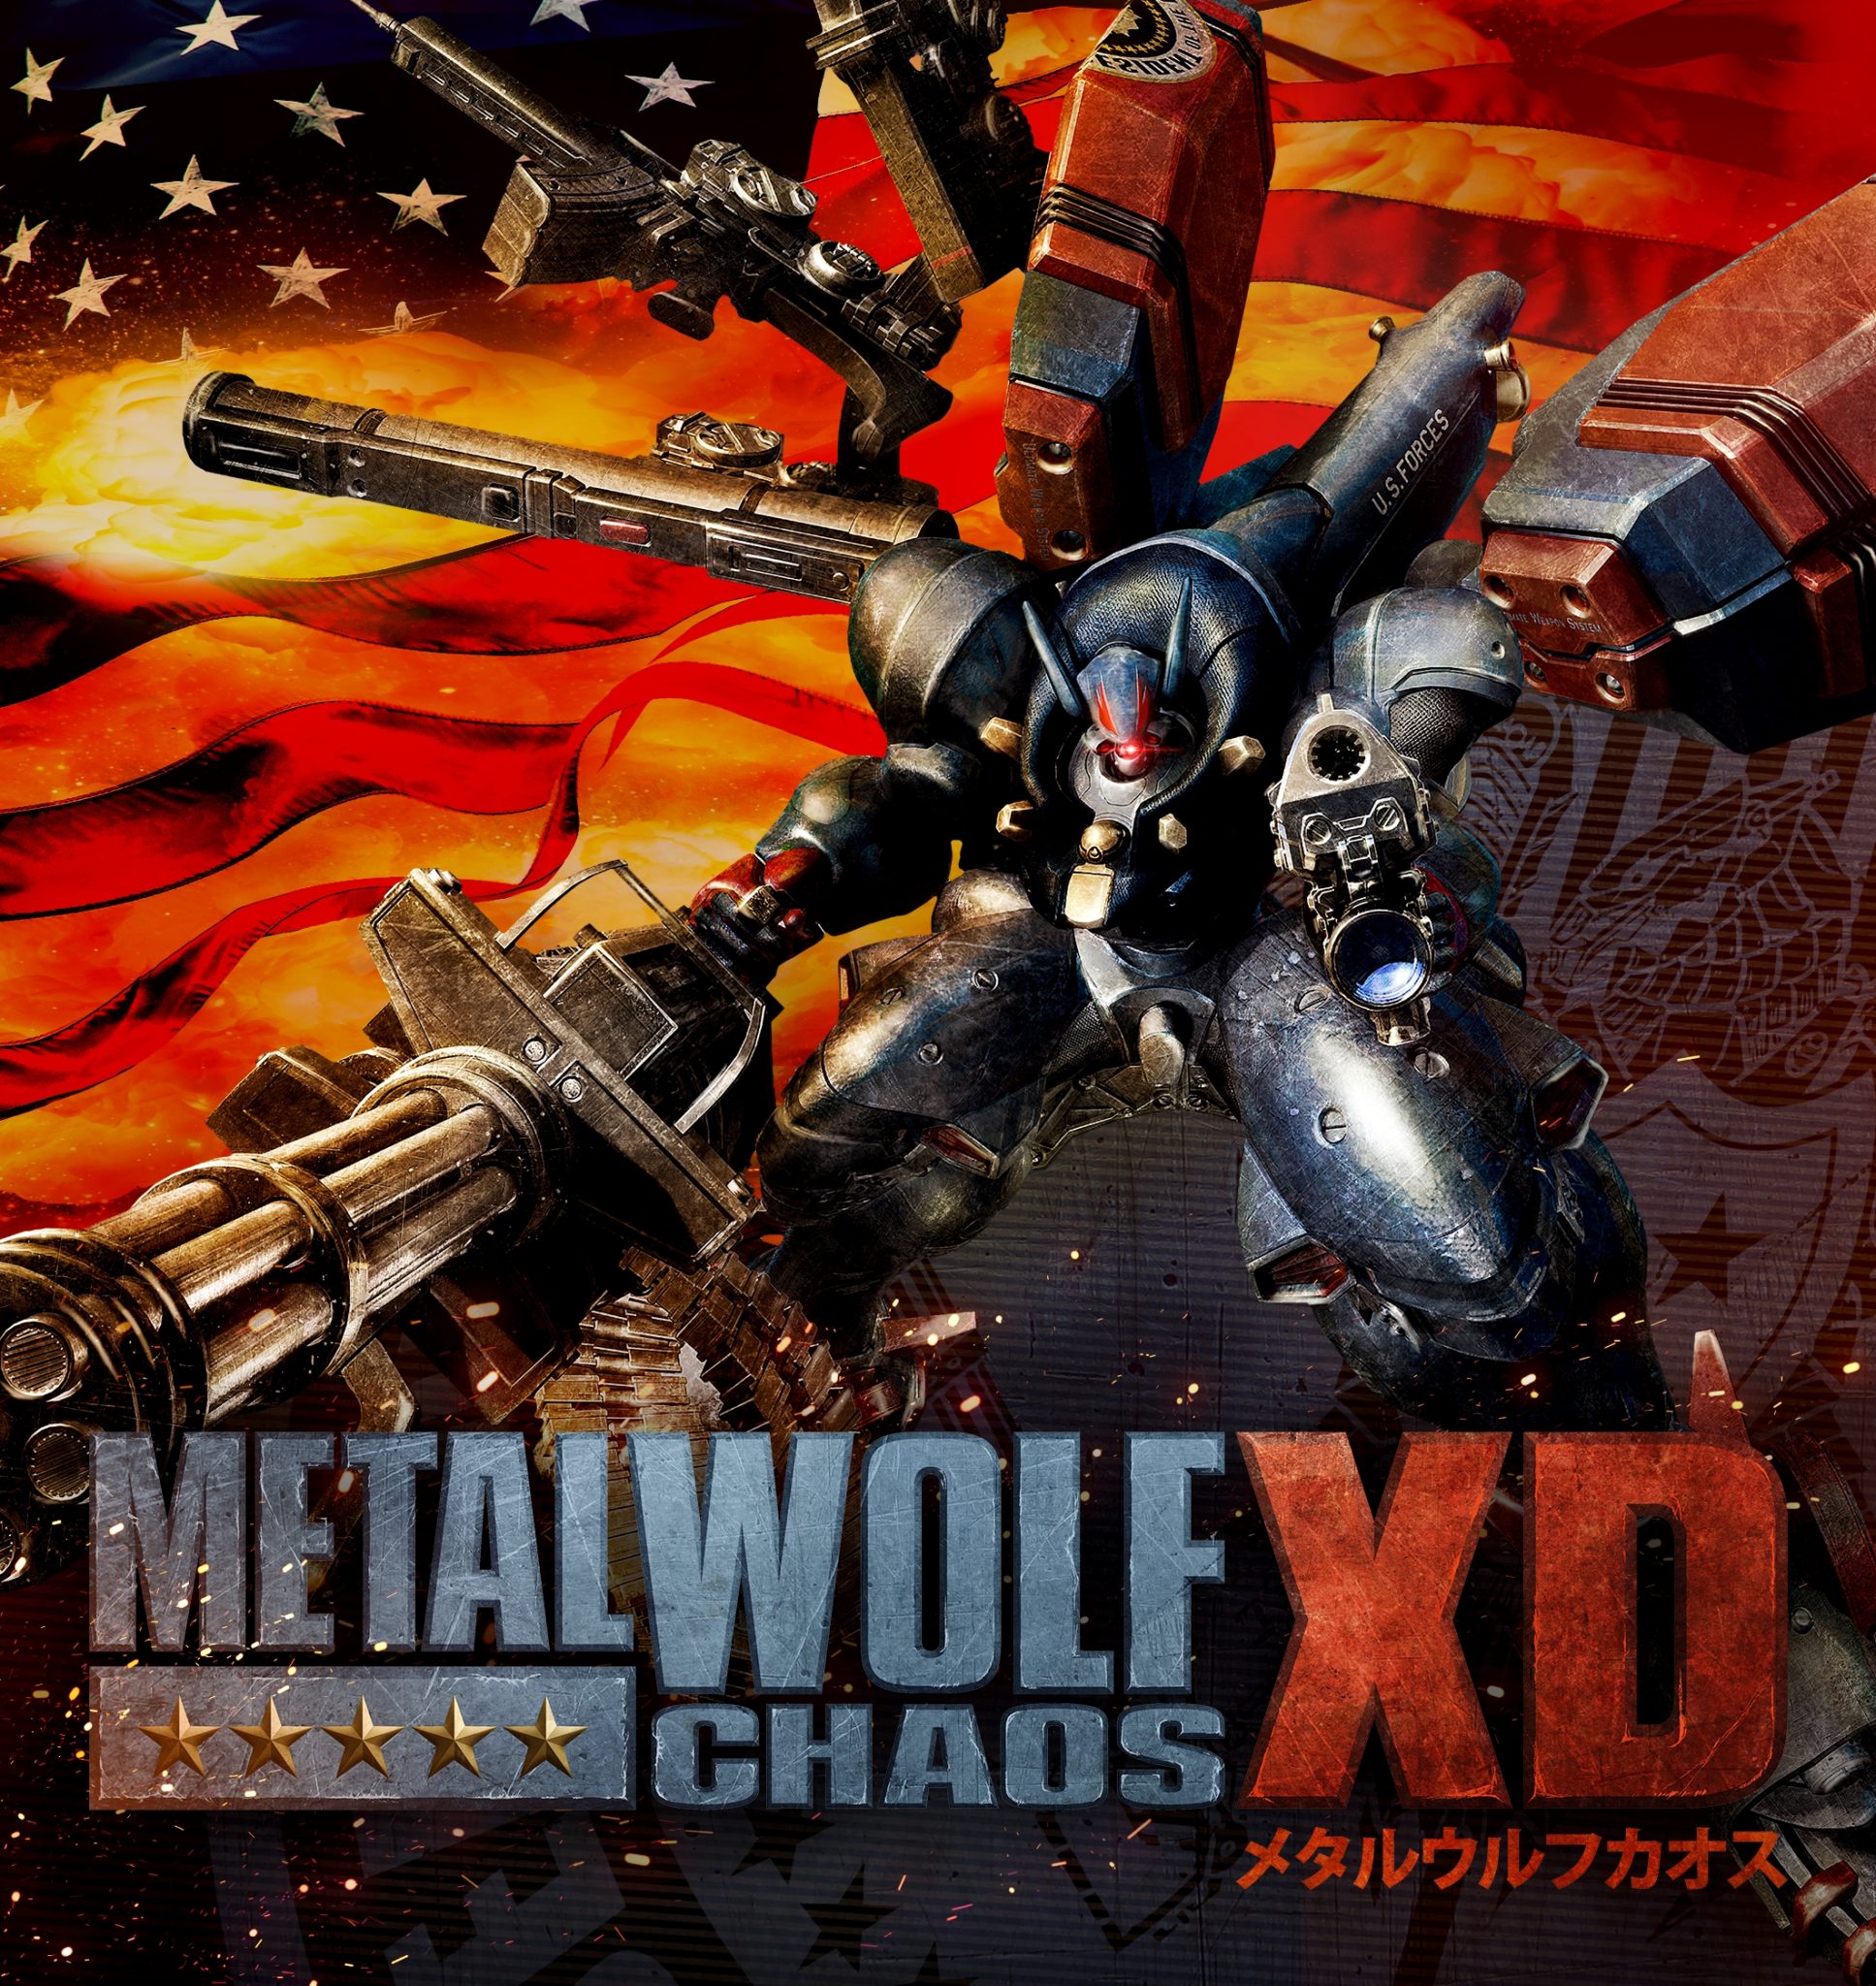 Metal Wolf Chaos. A giant mecha holding guns in front of an American flag.